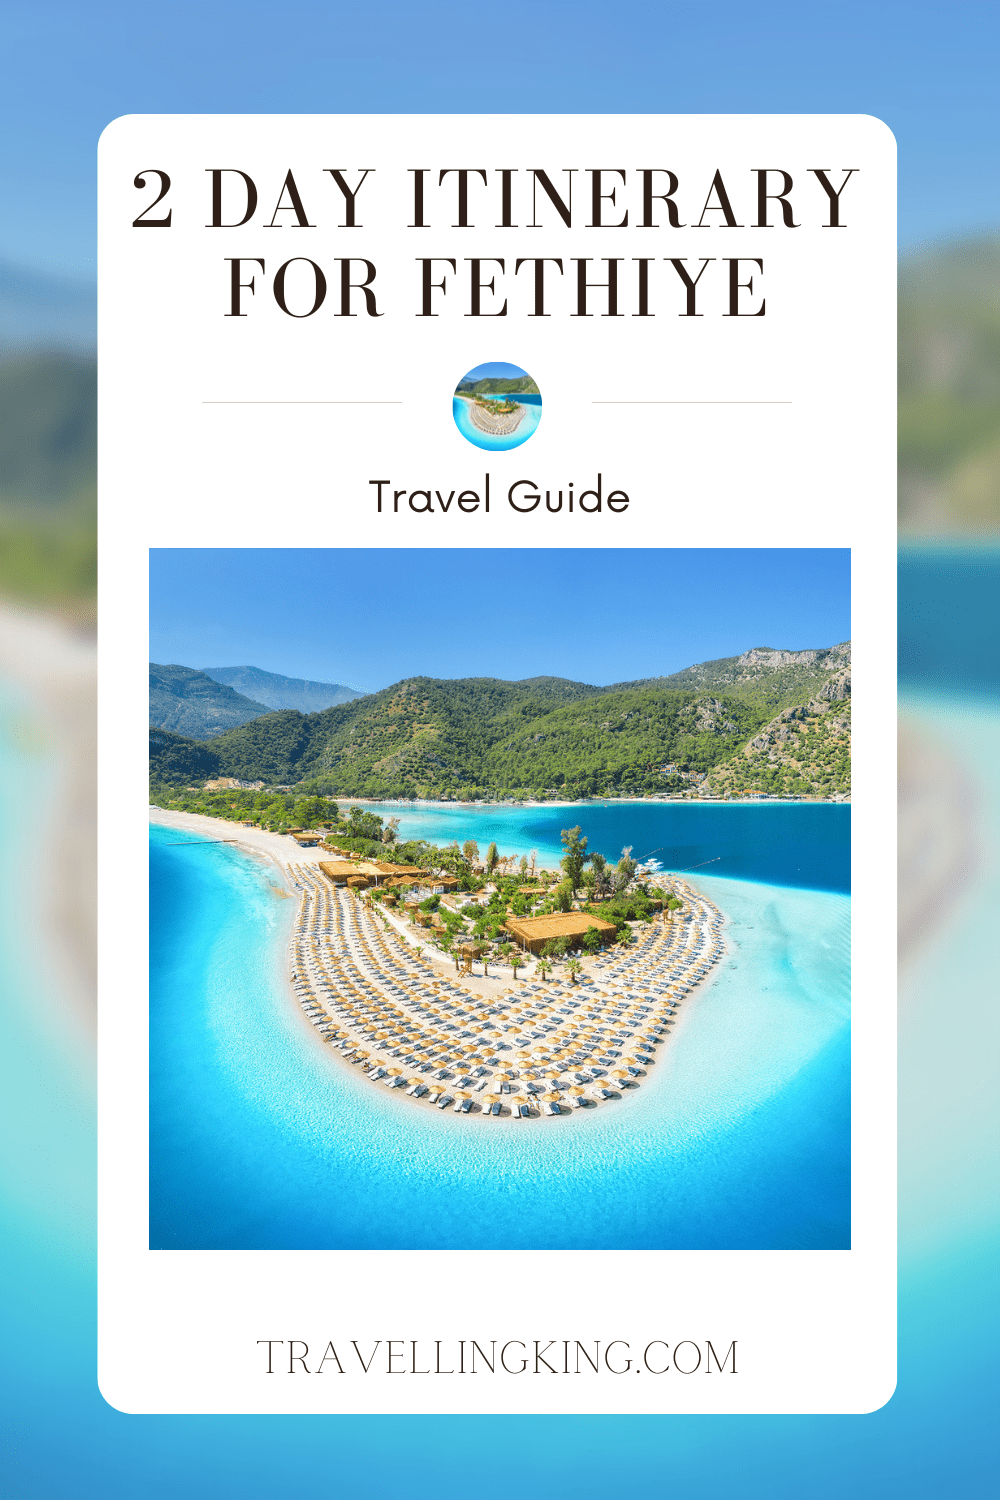 48 hours in Fethiye - A 2 day Itinerary